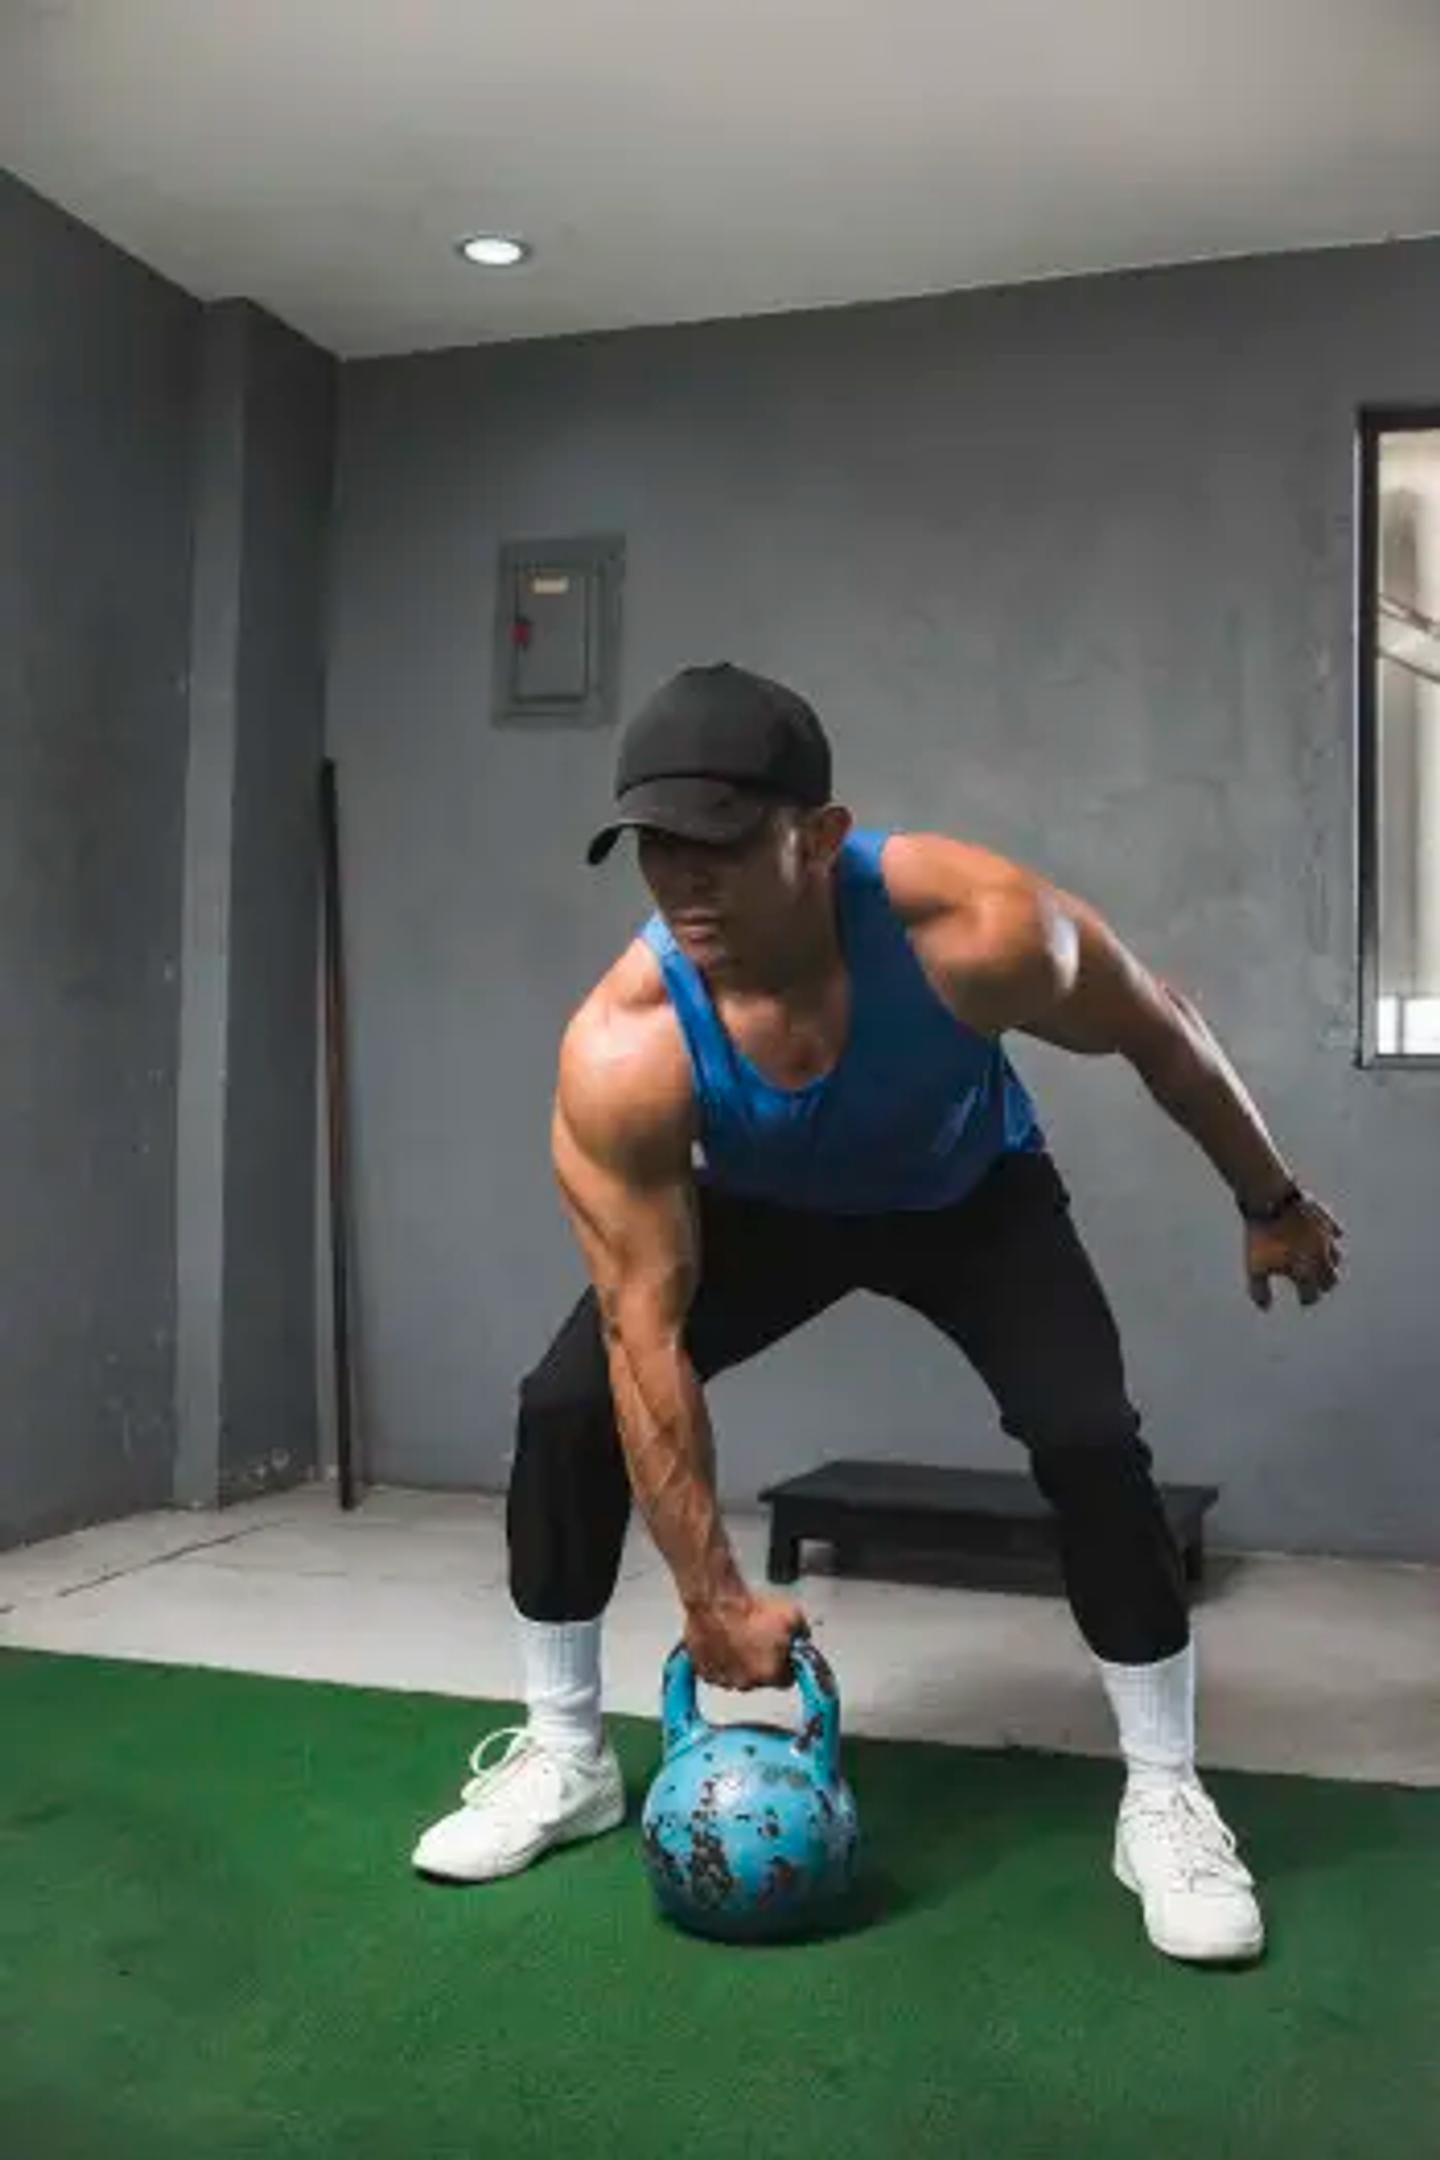 A fit muscular guy prepares to do a set of single arm shoulder thrusters